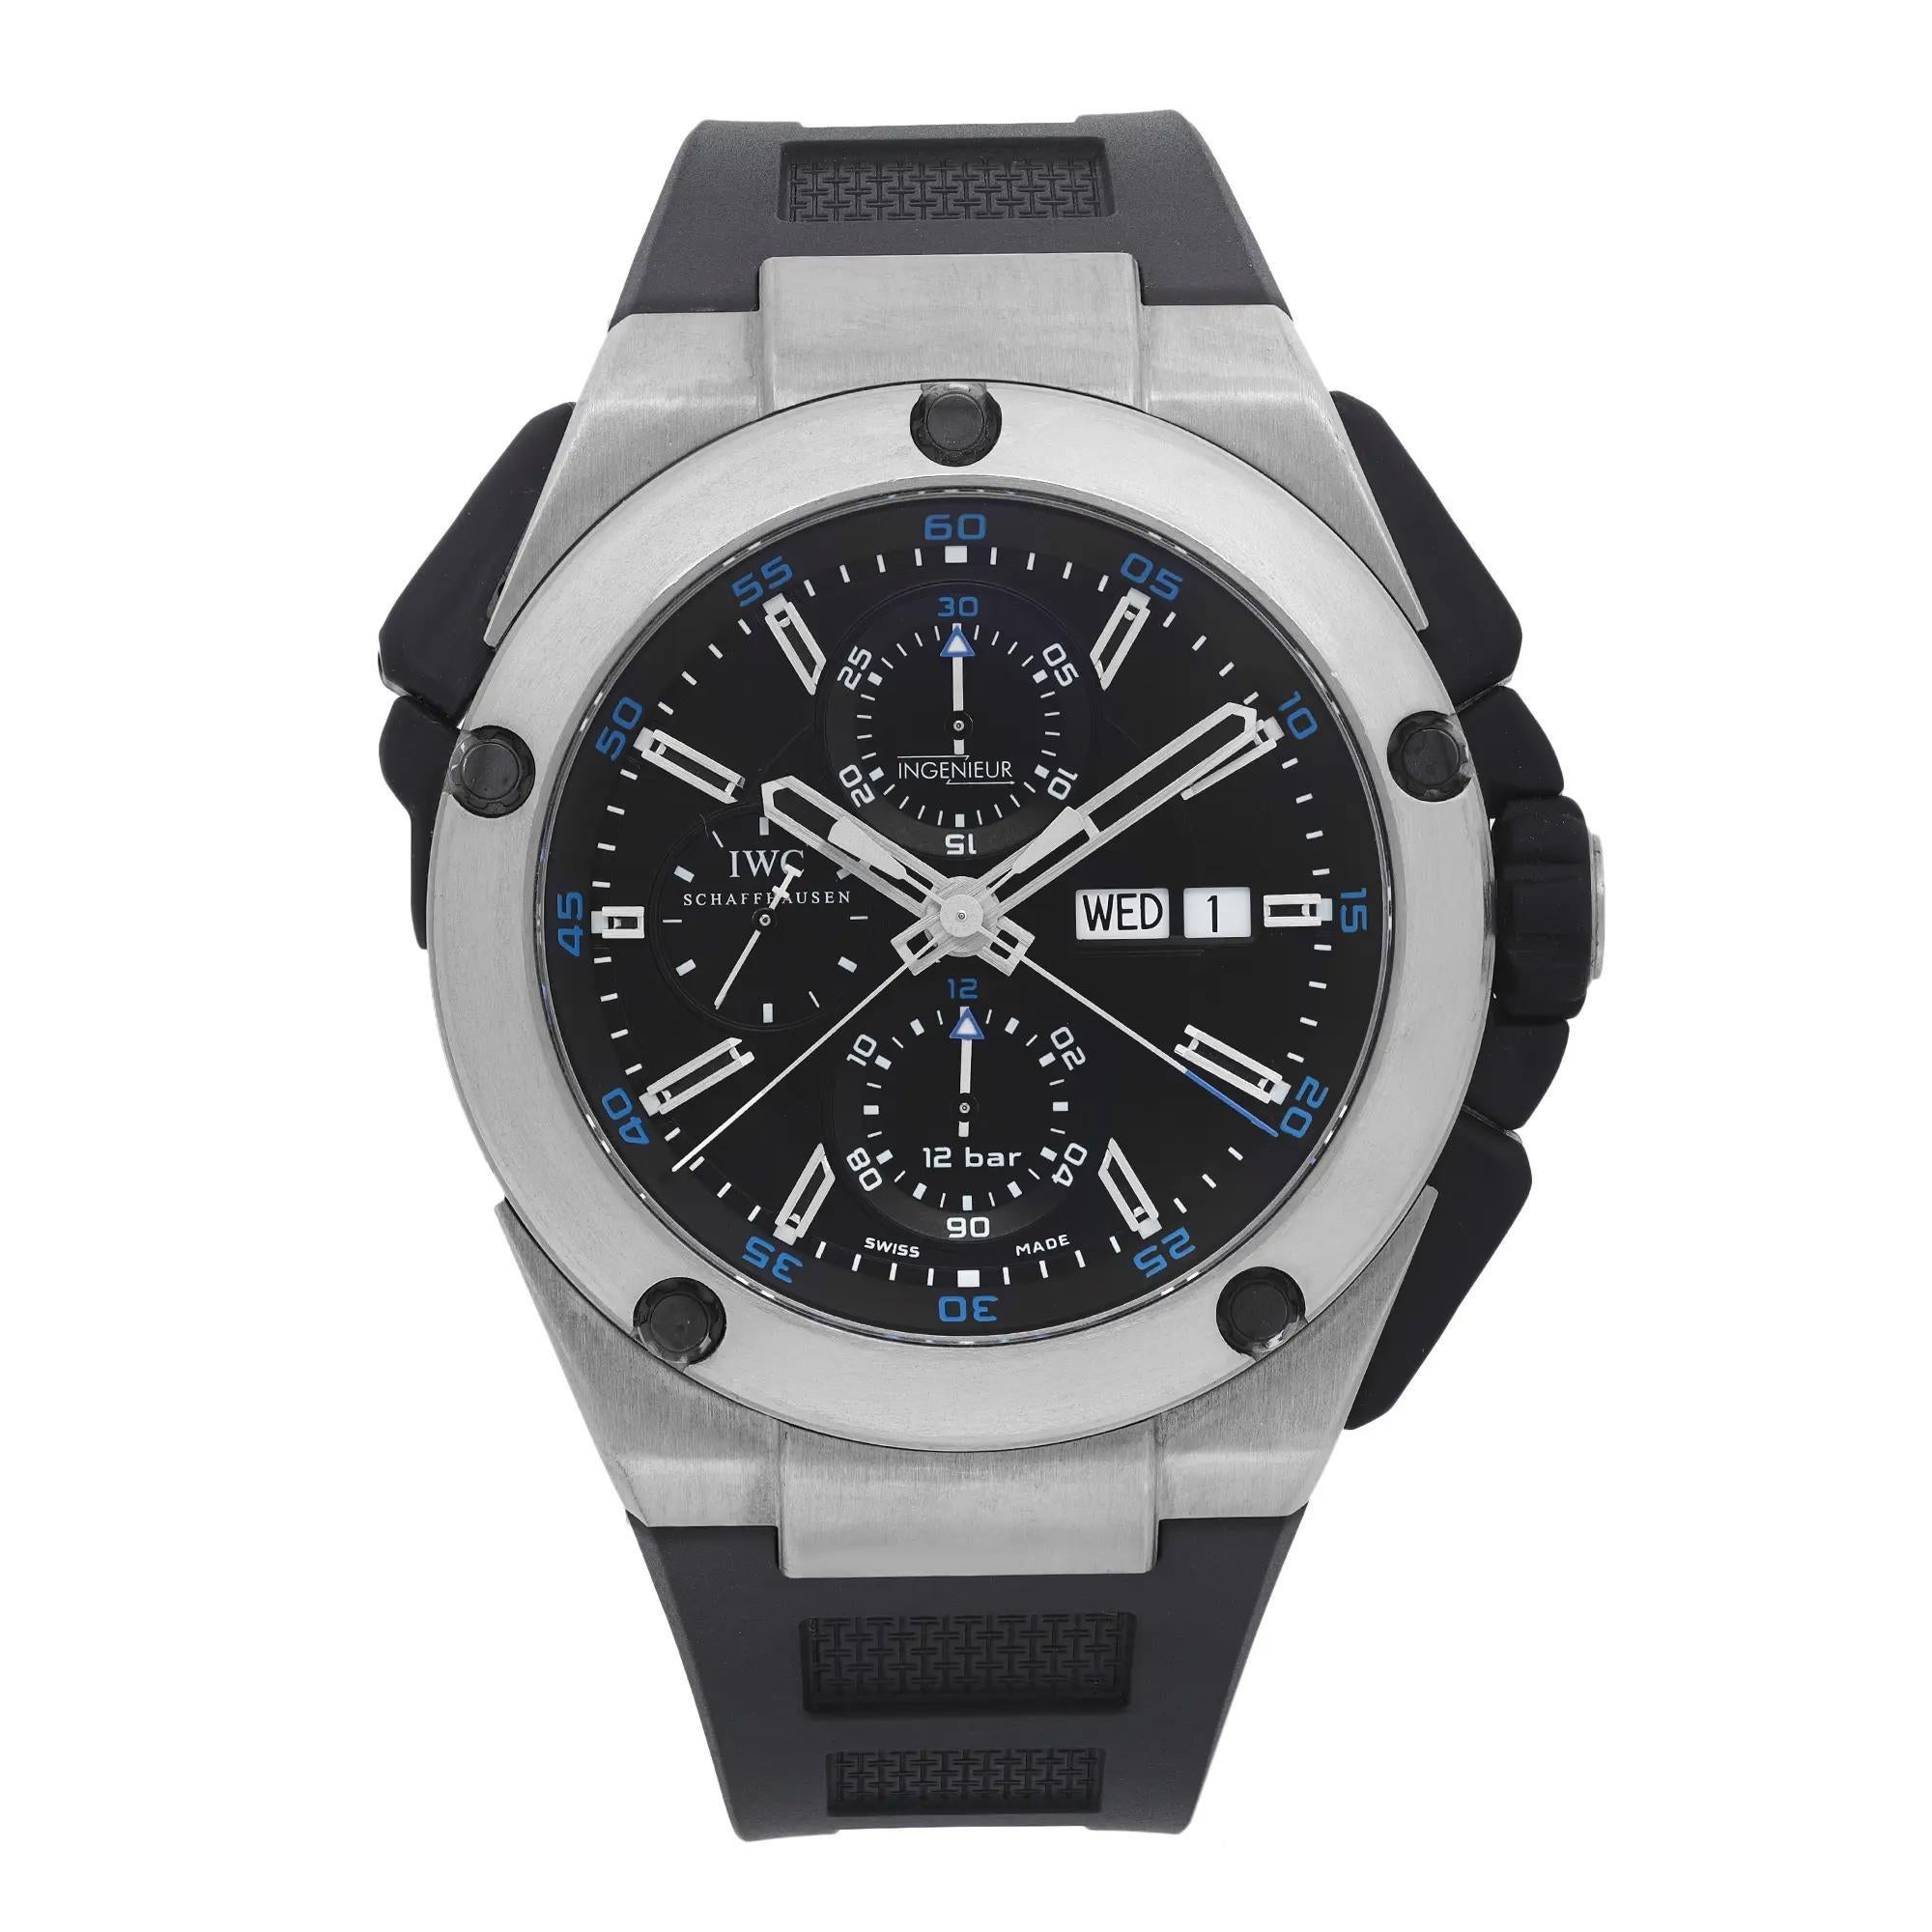 IWC Ingenieur Double chronograph Titanium Black Dial Automatic Watch IW376501 For Sale